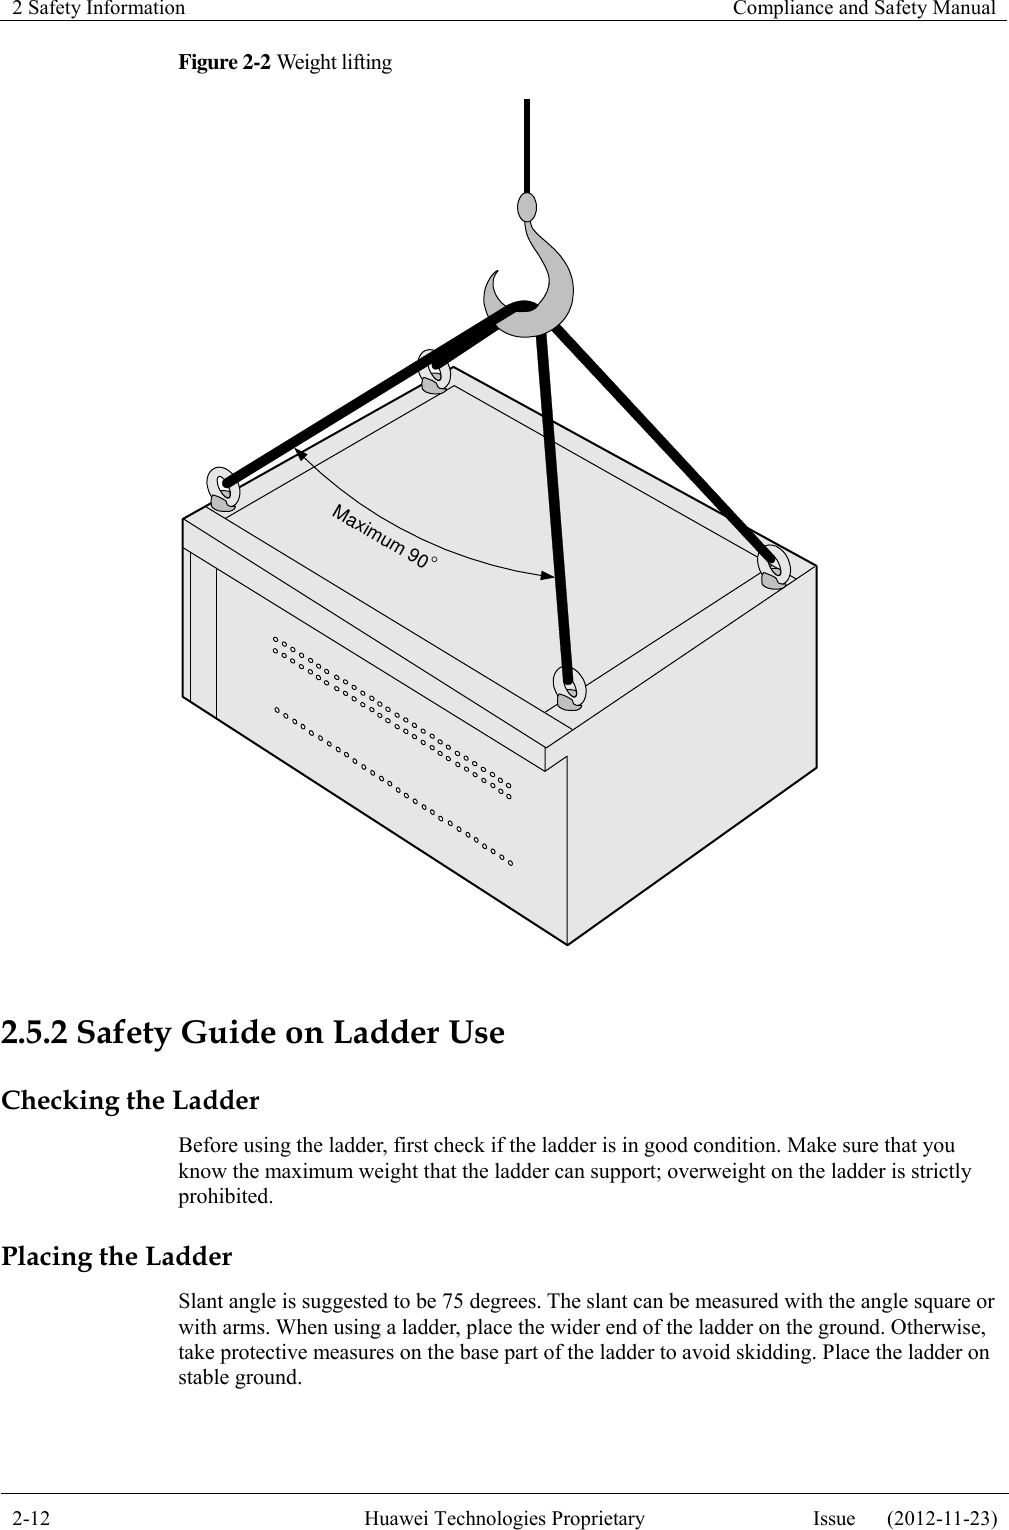 2 Safety Information    Compliance and Safety Manual  2-12 Huawei Technologies Proprietary Issue      (2012-11-23)  Figure 2-2 Weight lifting Maximum 90  2.5.2 Safety Guide on Ladder Use Checking the Ladder Before using the ladder, first check if the ladder is in good condition. Make sure that you know the maximum weight that the ladder can support; overweight on the ladder is strictly prohibited. Placing the Ladder Slant angle is suggested to be 75 degrees. The slant can be measured with the angle square or with arms. When using a ladder, place the wider end of the ladder on the ground. Otherwise, take protective measures on the base part of the ladder to avoid skidding. Place the ladder on stable ground. 